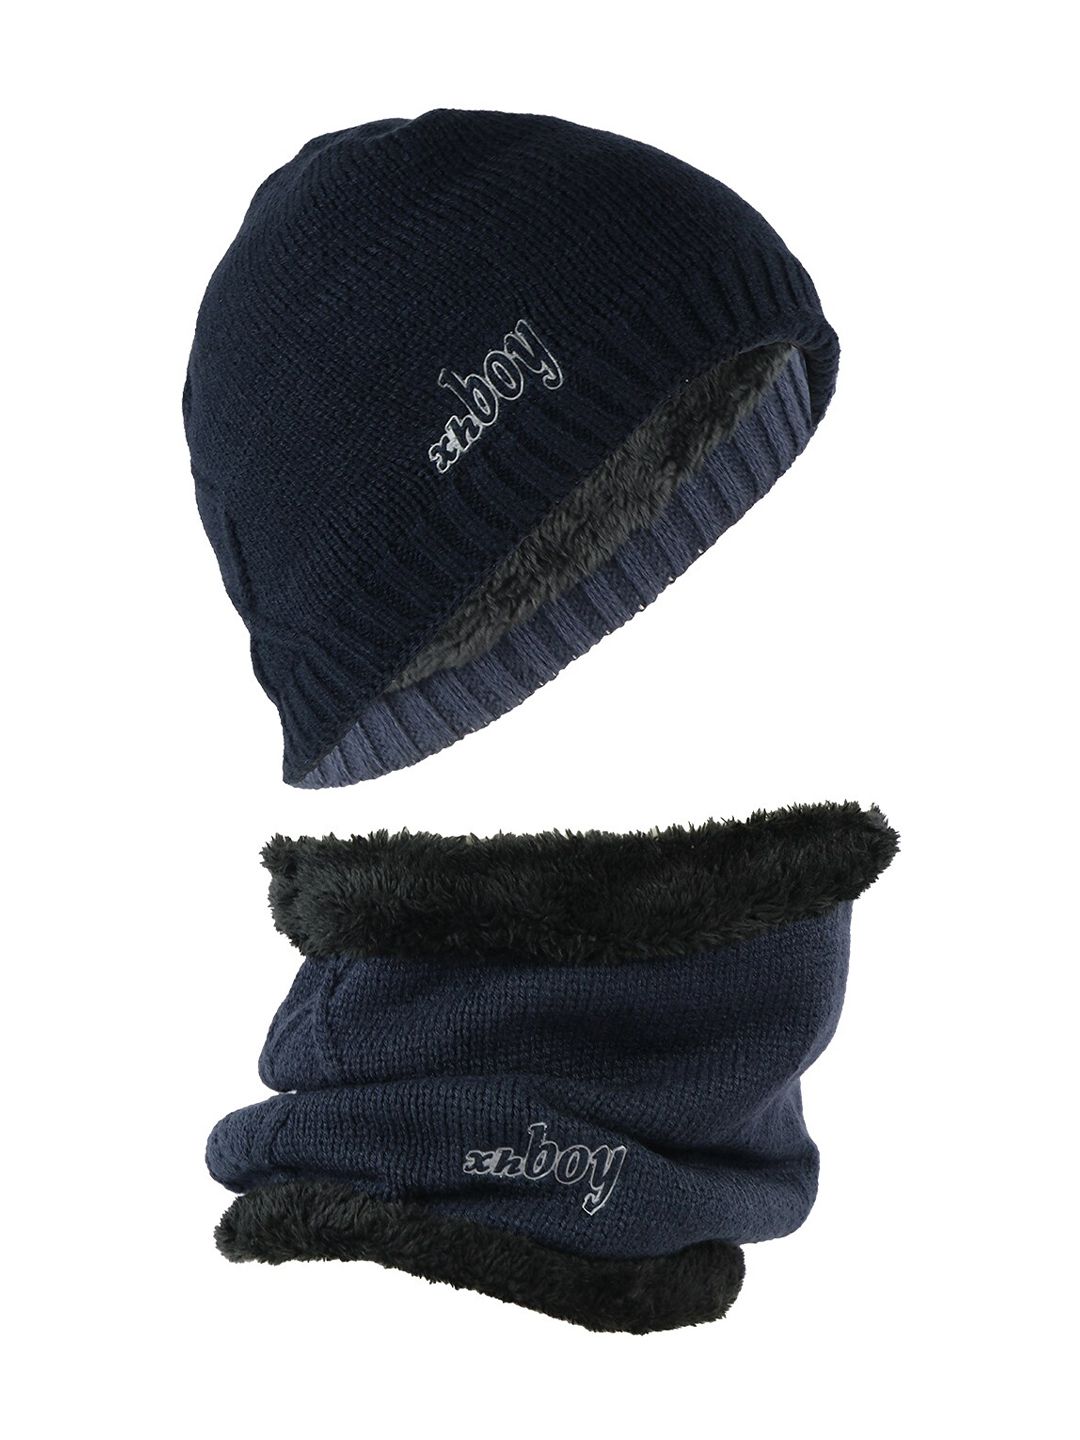 iSWEVEN Unisex Navy Blue & Black Beanie Price in India